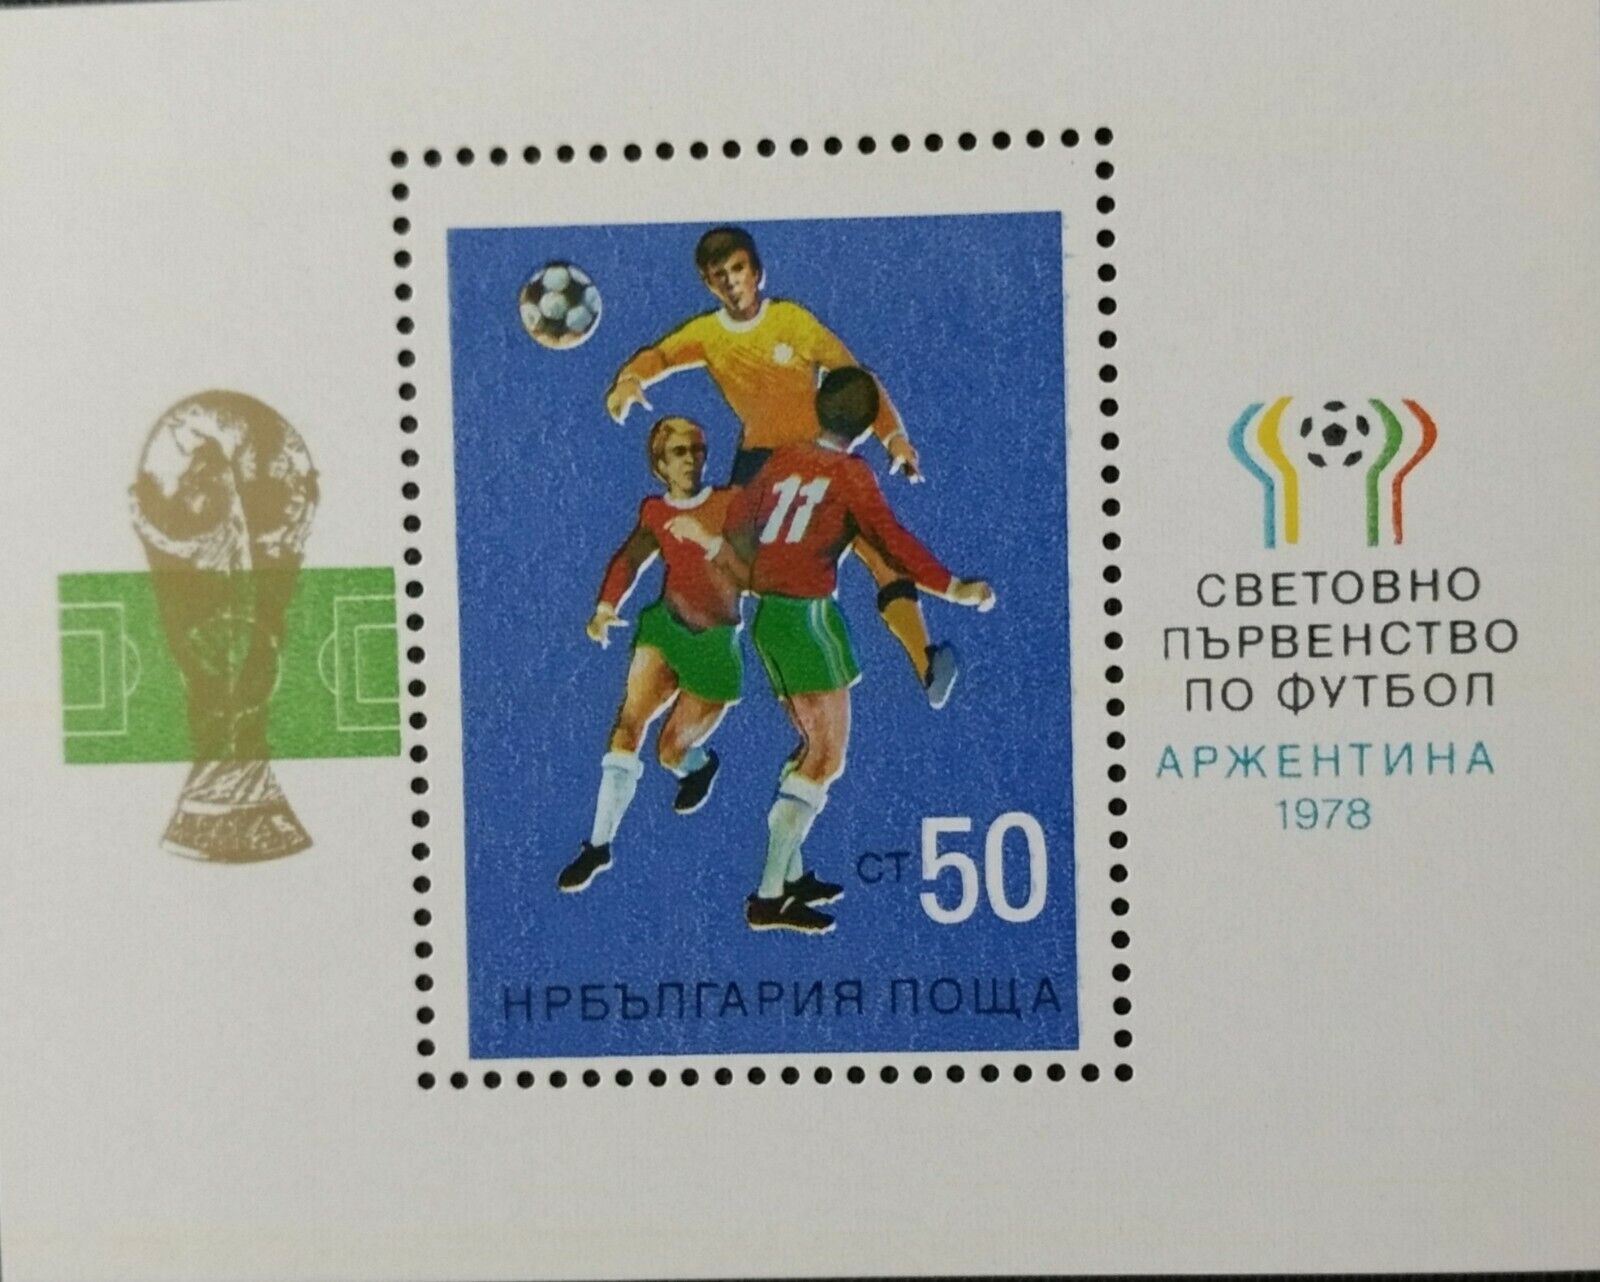 128. Sales for sale BULGARIA 1978 STAMP M FOOTBALL. Houston Mall CUP S MNH WORLD